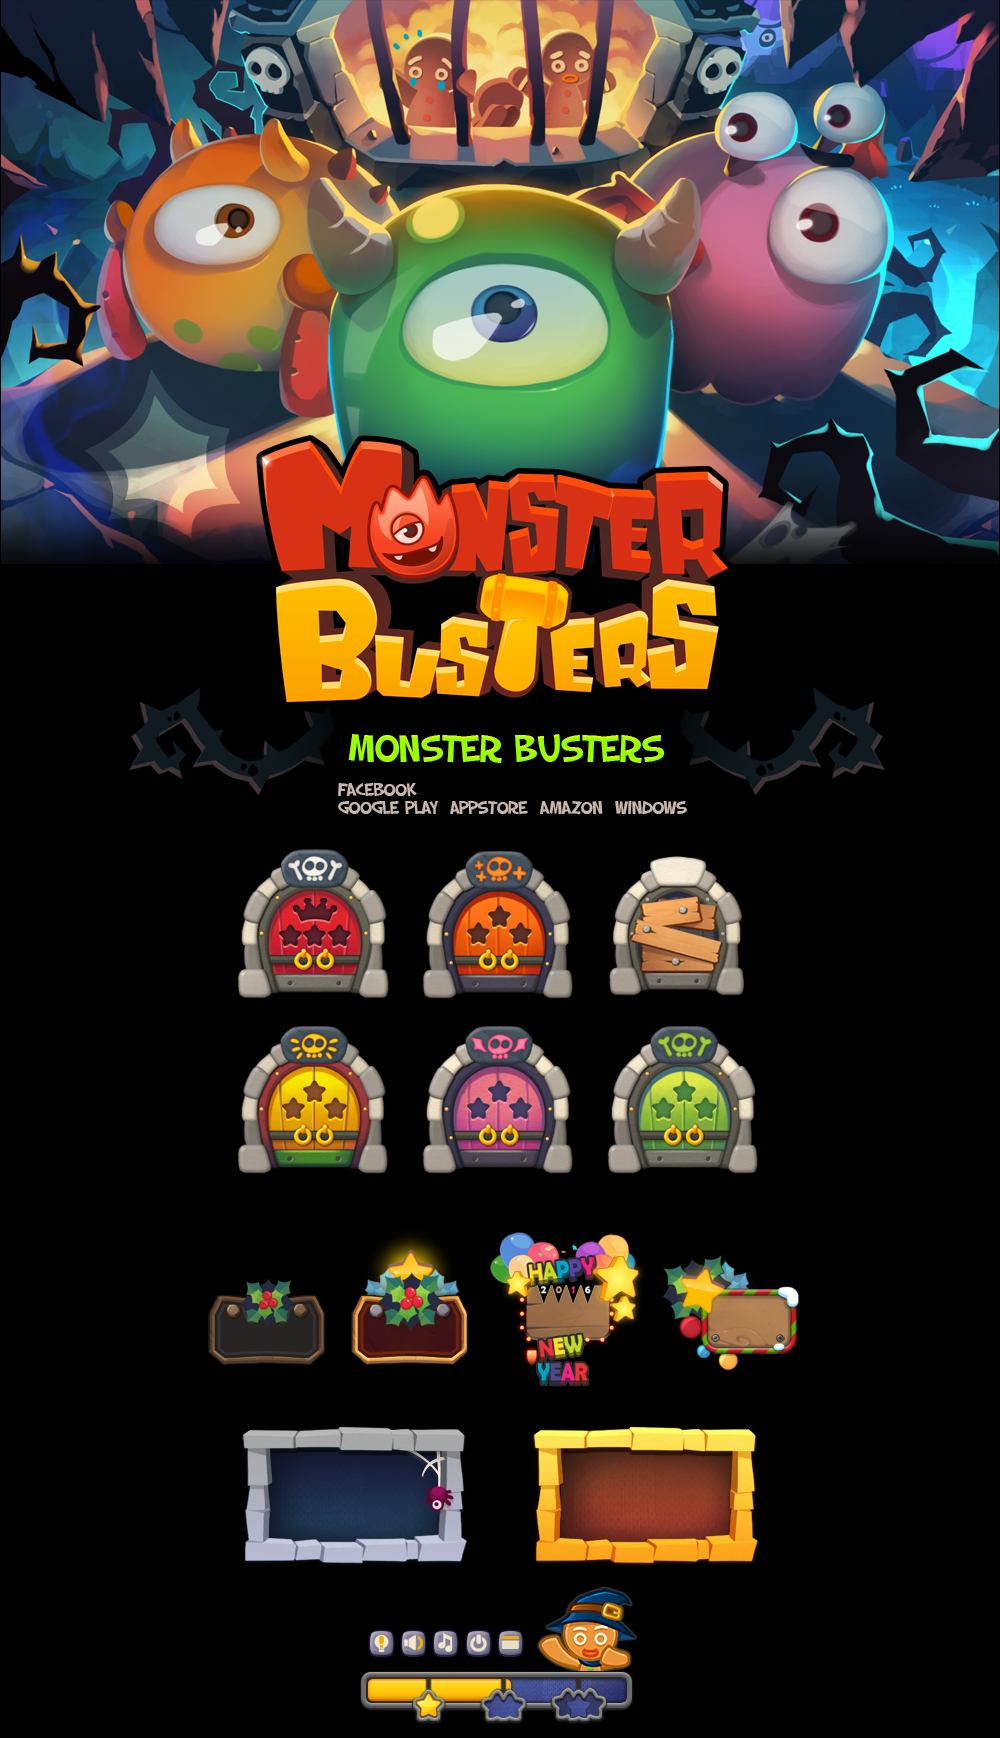 monster busters concept game match3 Puzzle game facebook game mobile game monster game ui UI